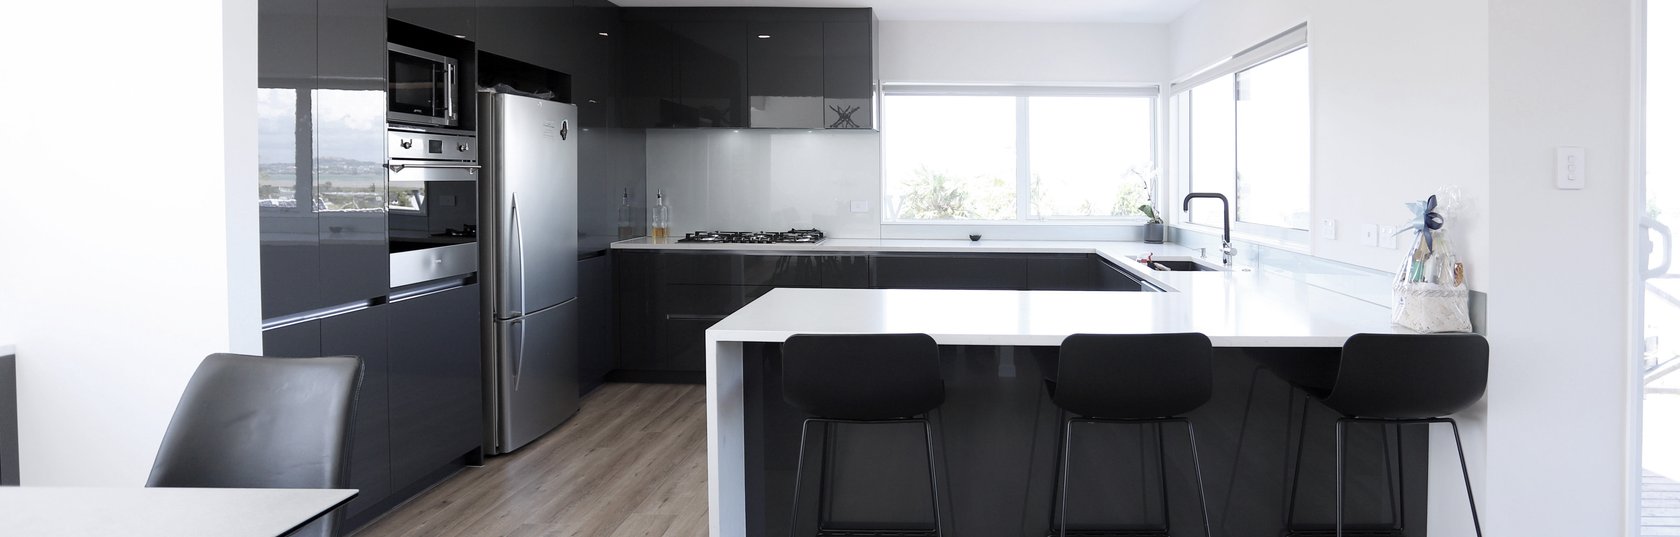 KITCHEN RENOVATION PHOTOS FOR OUR TOP 16 RENOVATIONS IN AUCKLAND